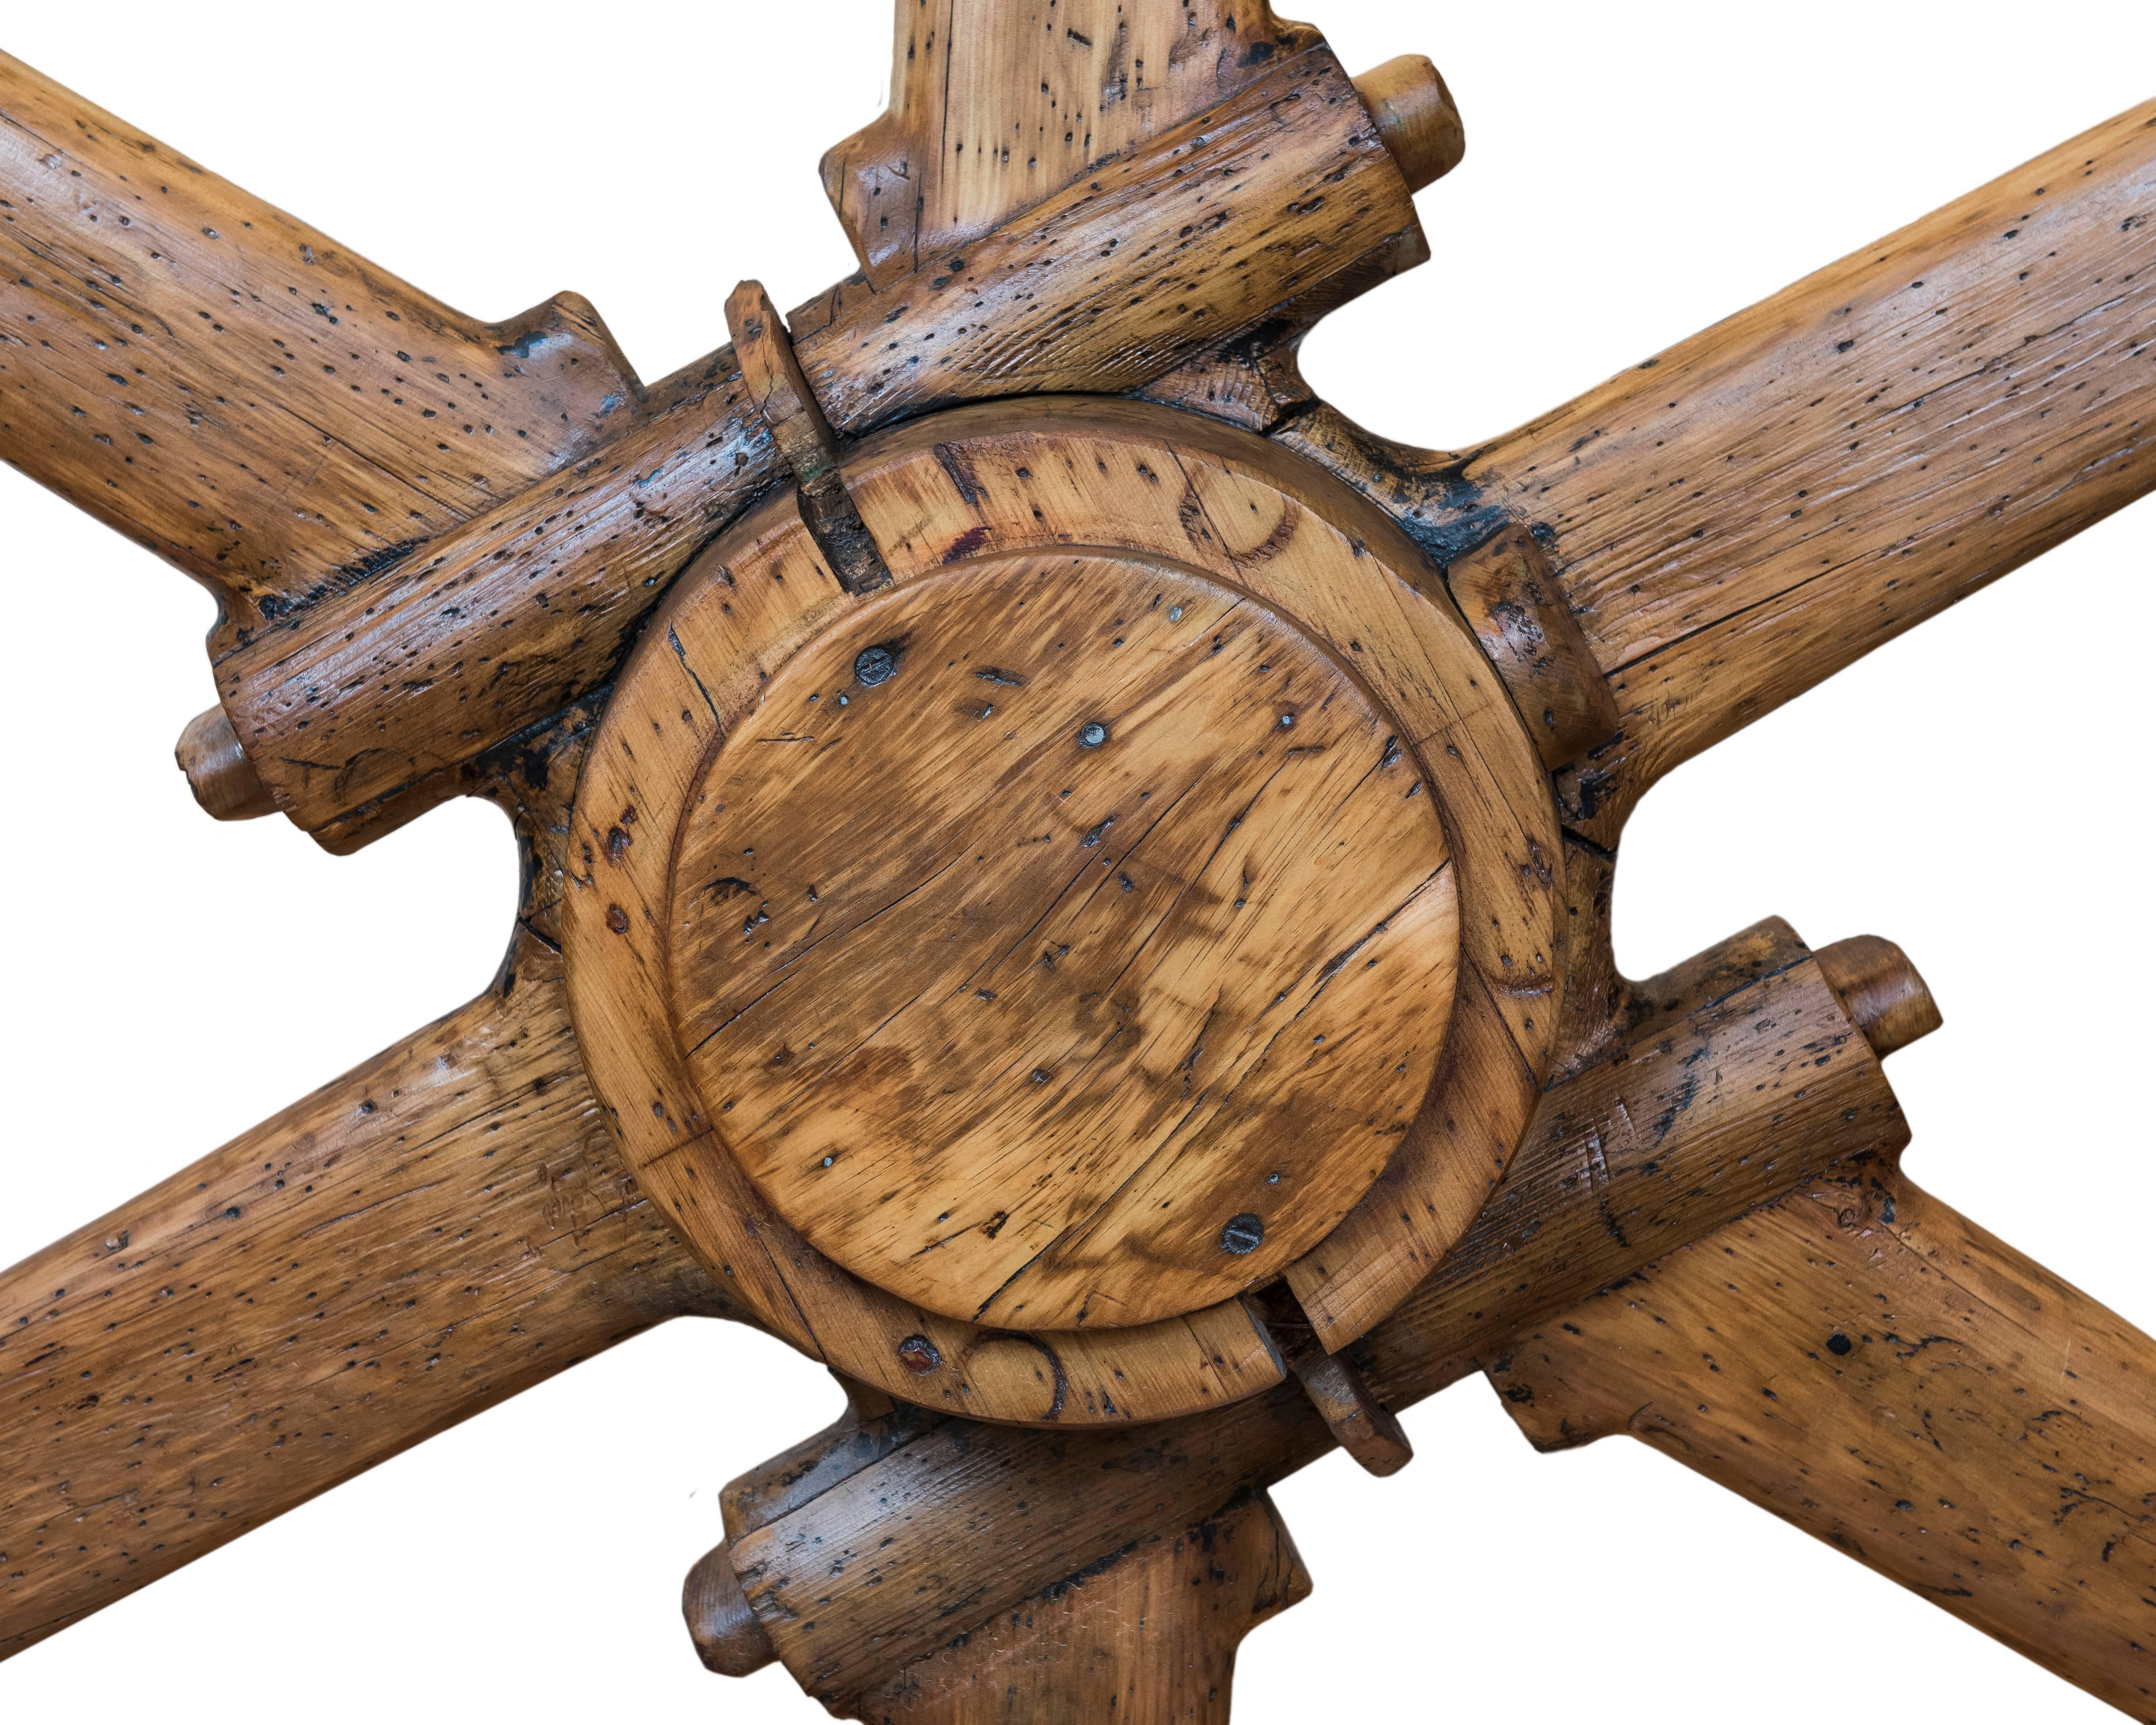 Hand-Crafted Large North American Industrial Wooden Wheel